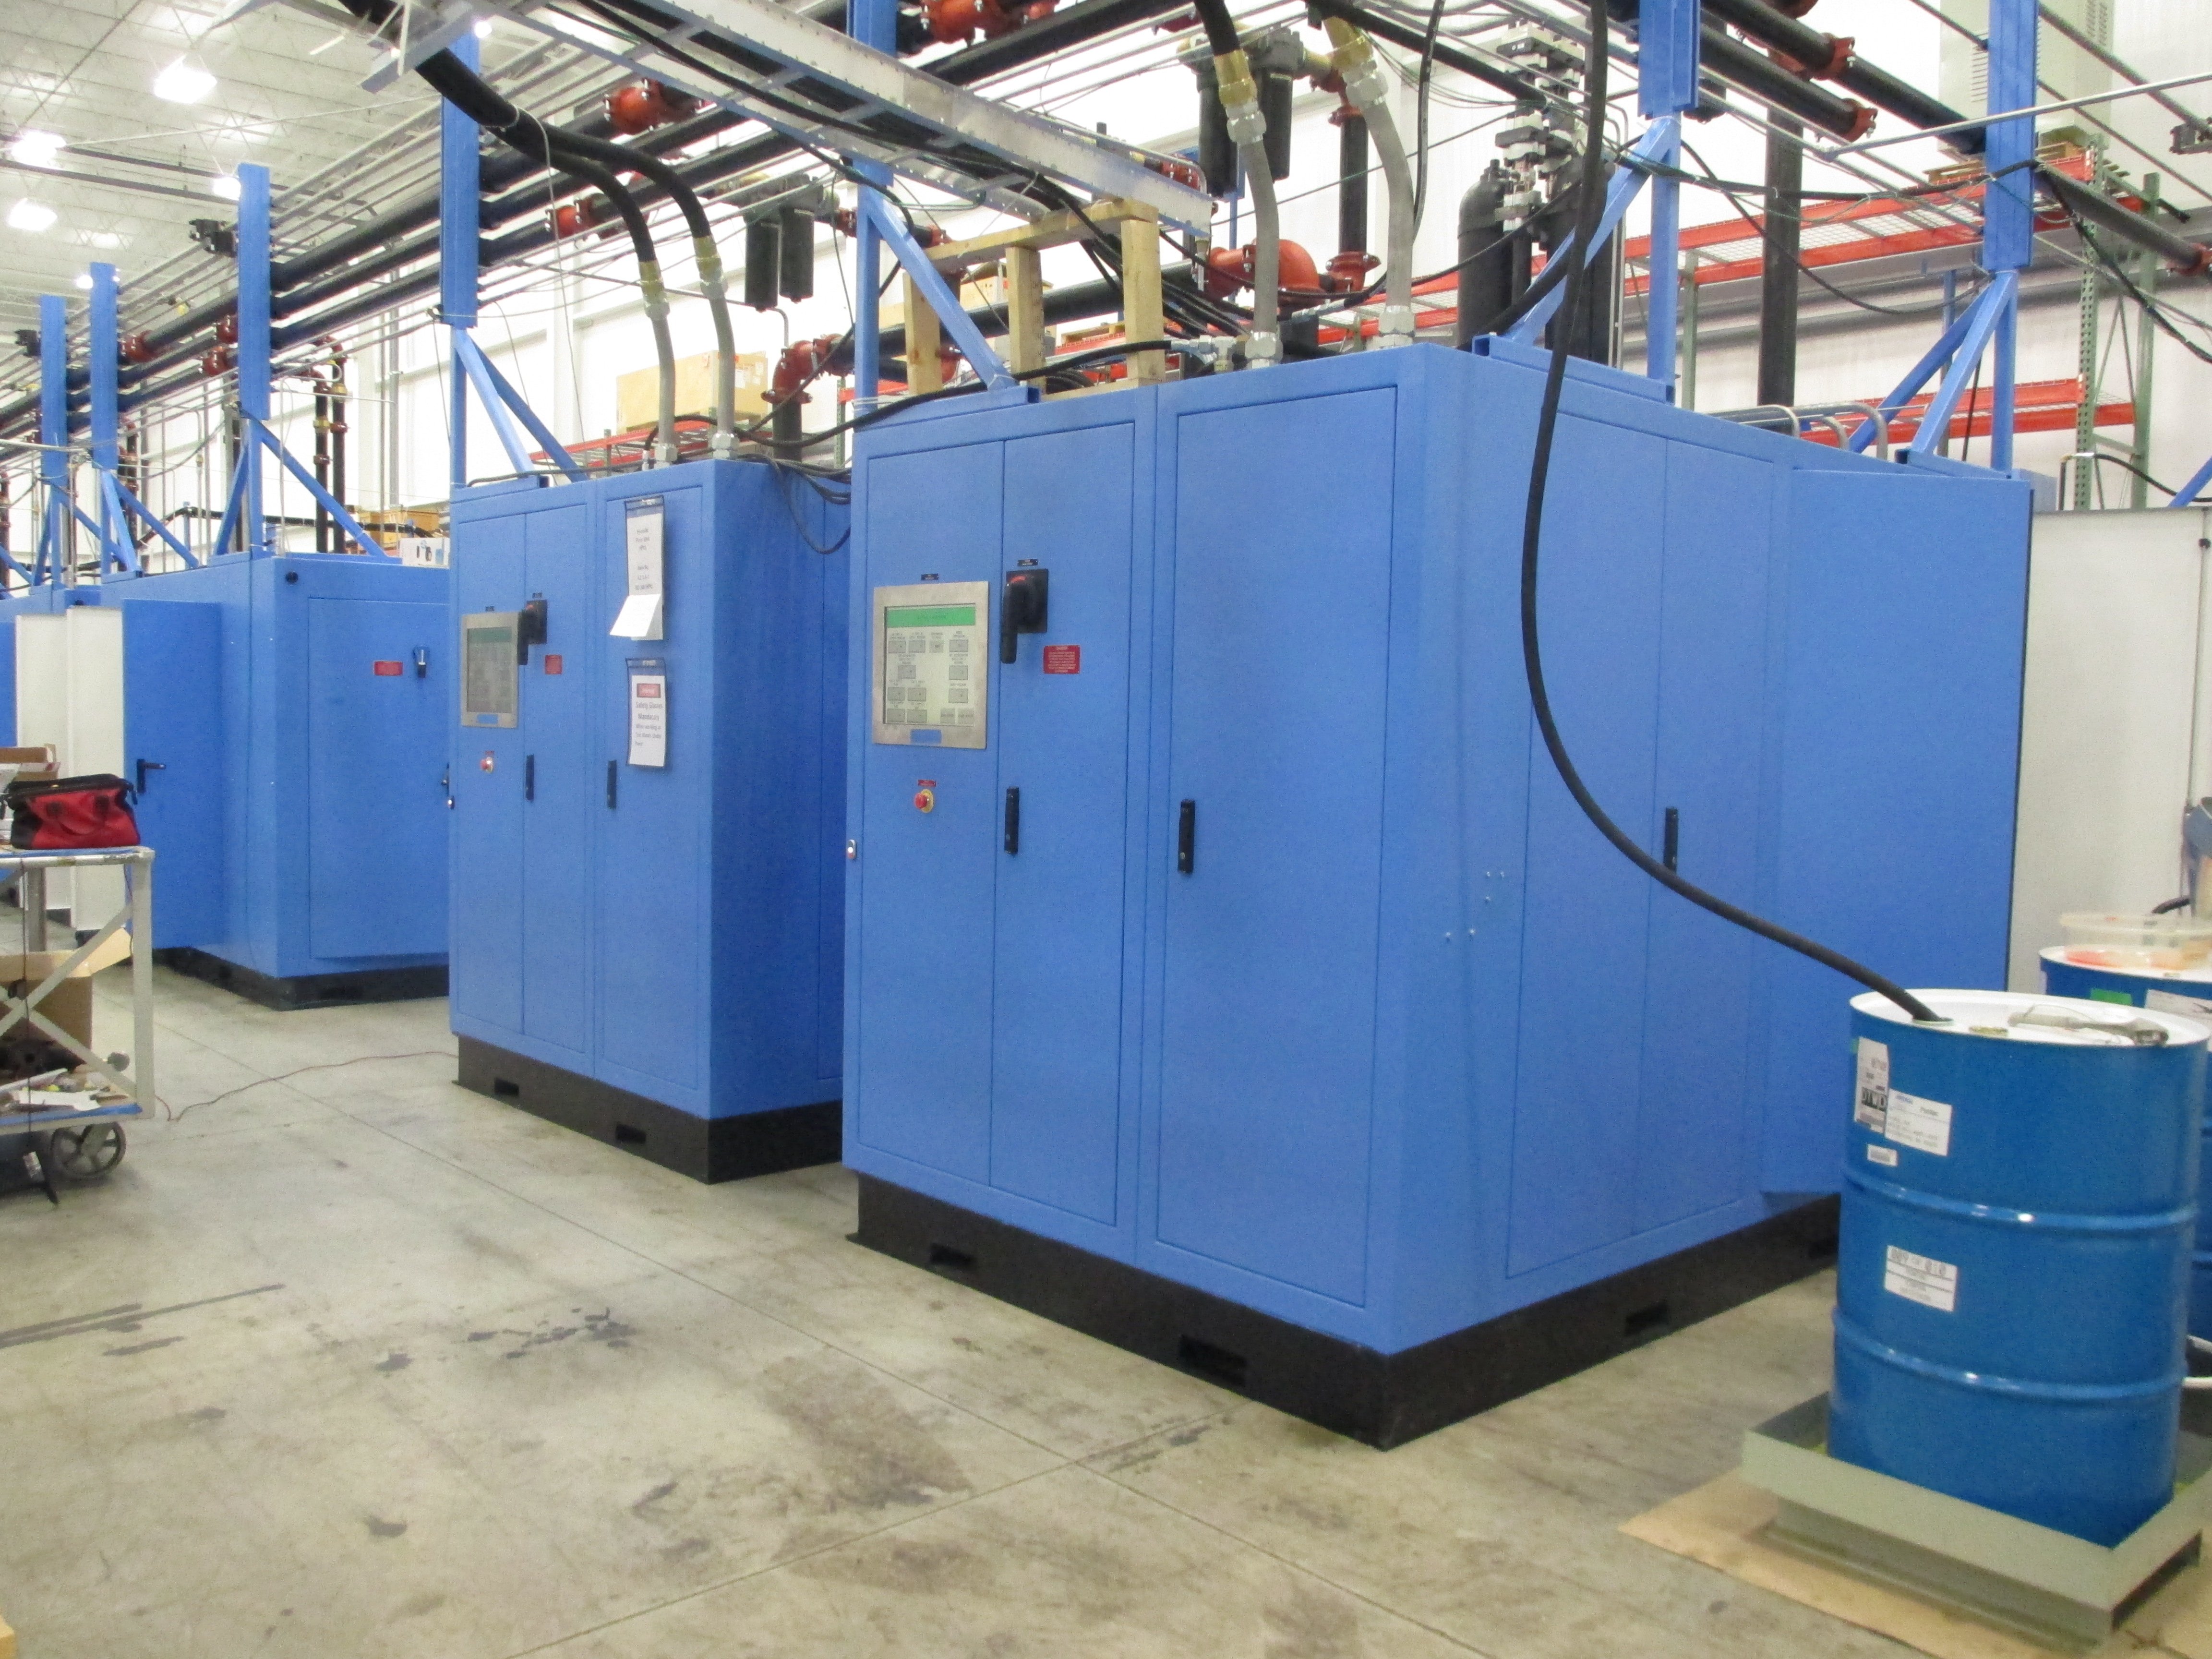 Stationary Hydraulic Power Units for Networked Hydraulic Component Test Shop